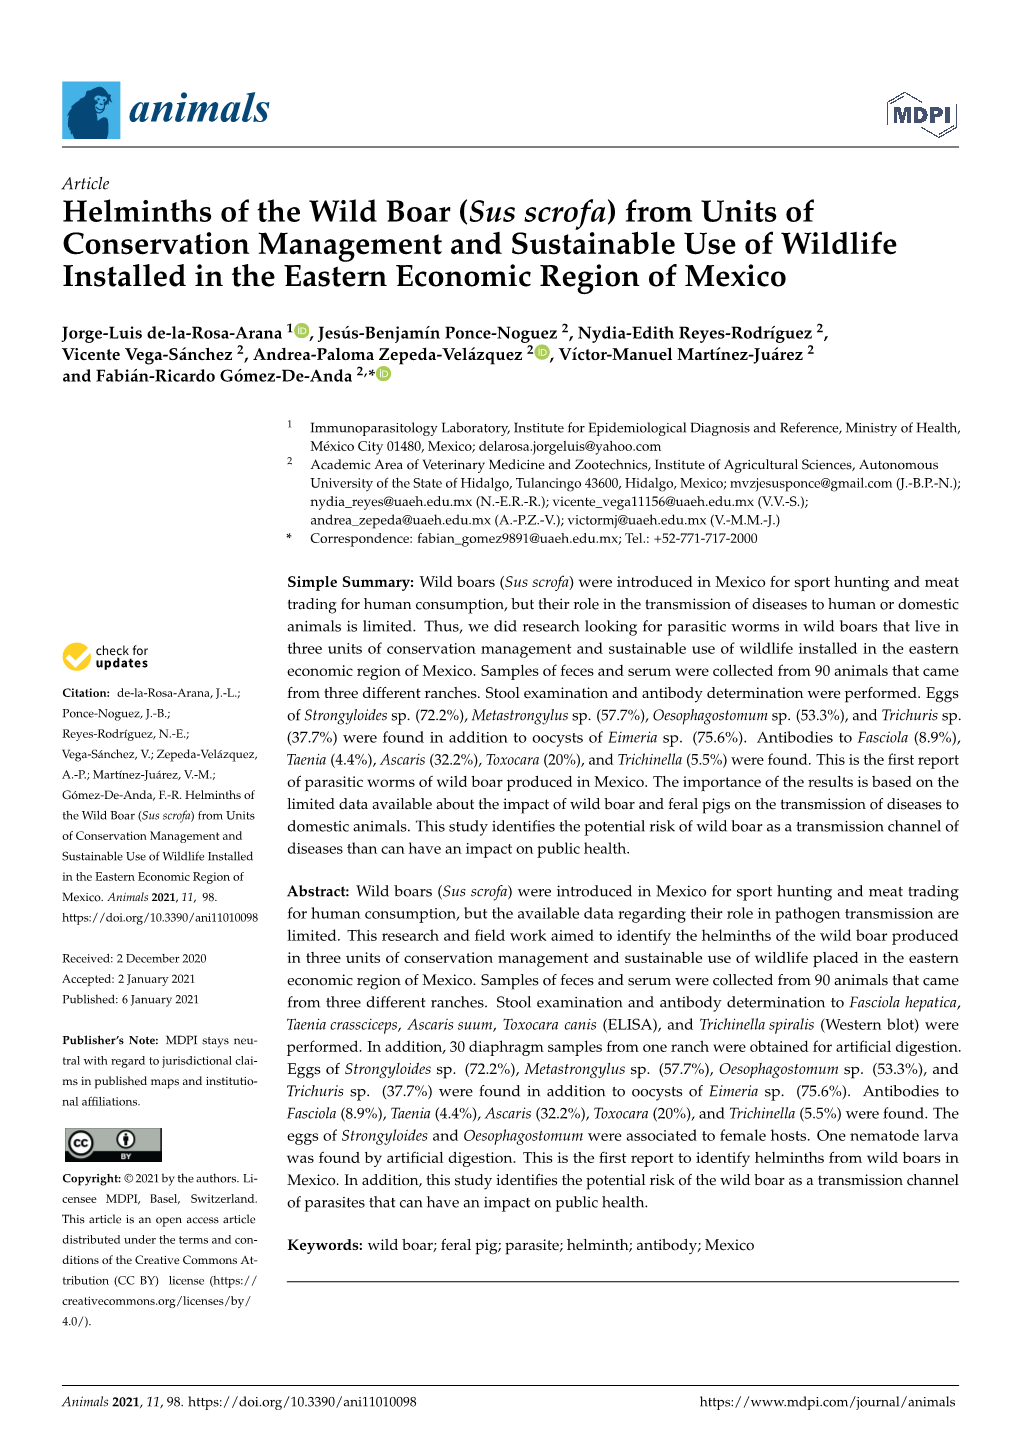 Helminths of the Wild Boar (Sus Scrofa) from Units of Conservation Management and Sustainable Use of Wildlife Installed in the Eastern Economic Region of Mexico